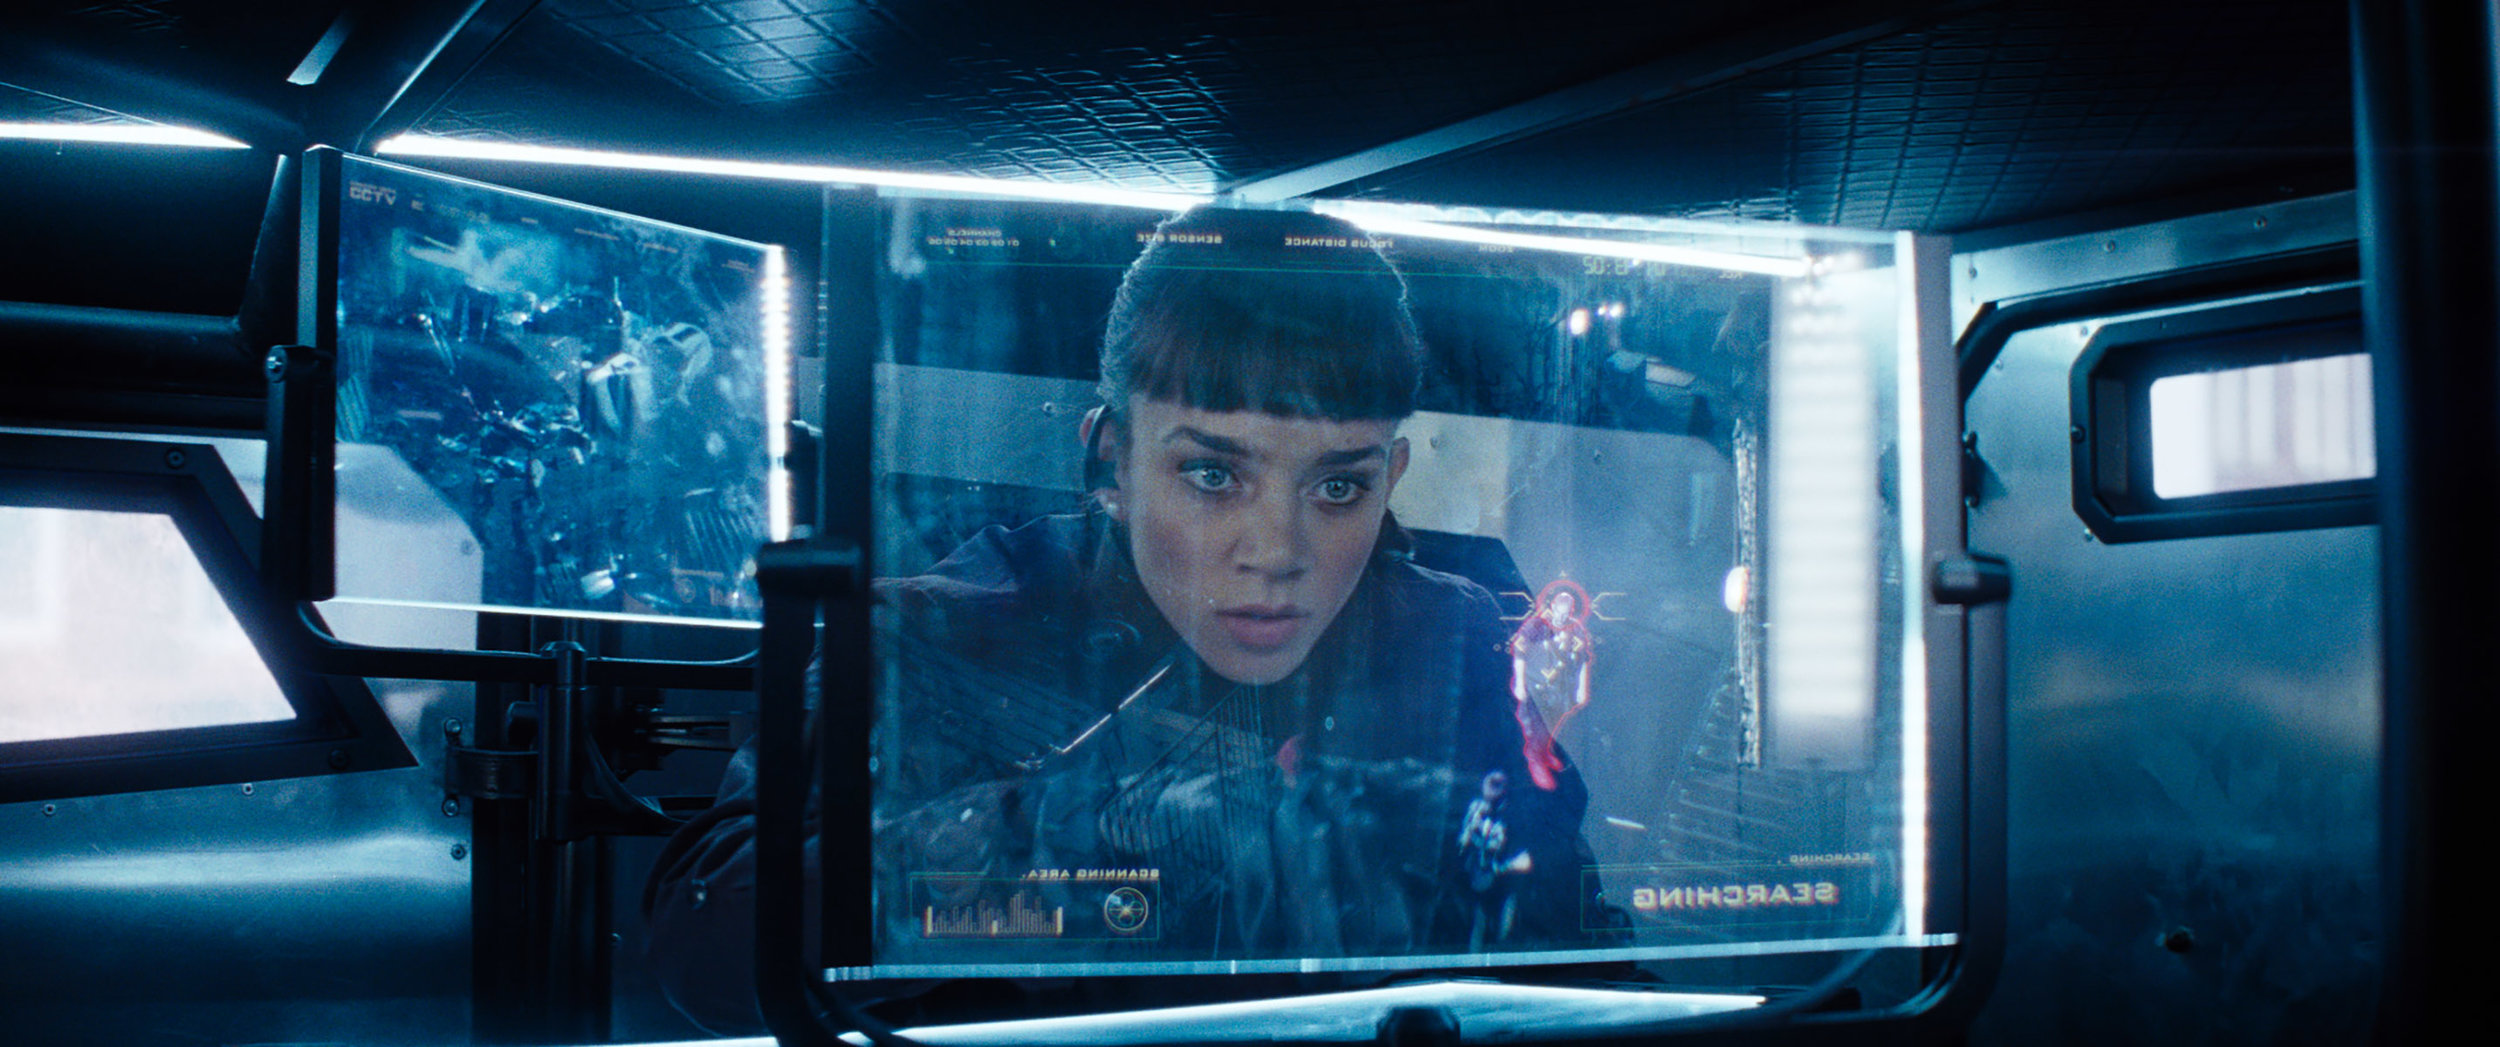 Ready Player One: 10 Things You Didn't Know About i-R0k